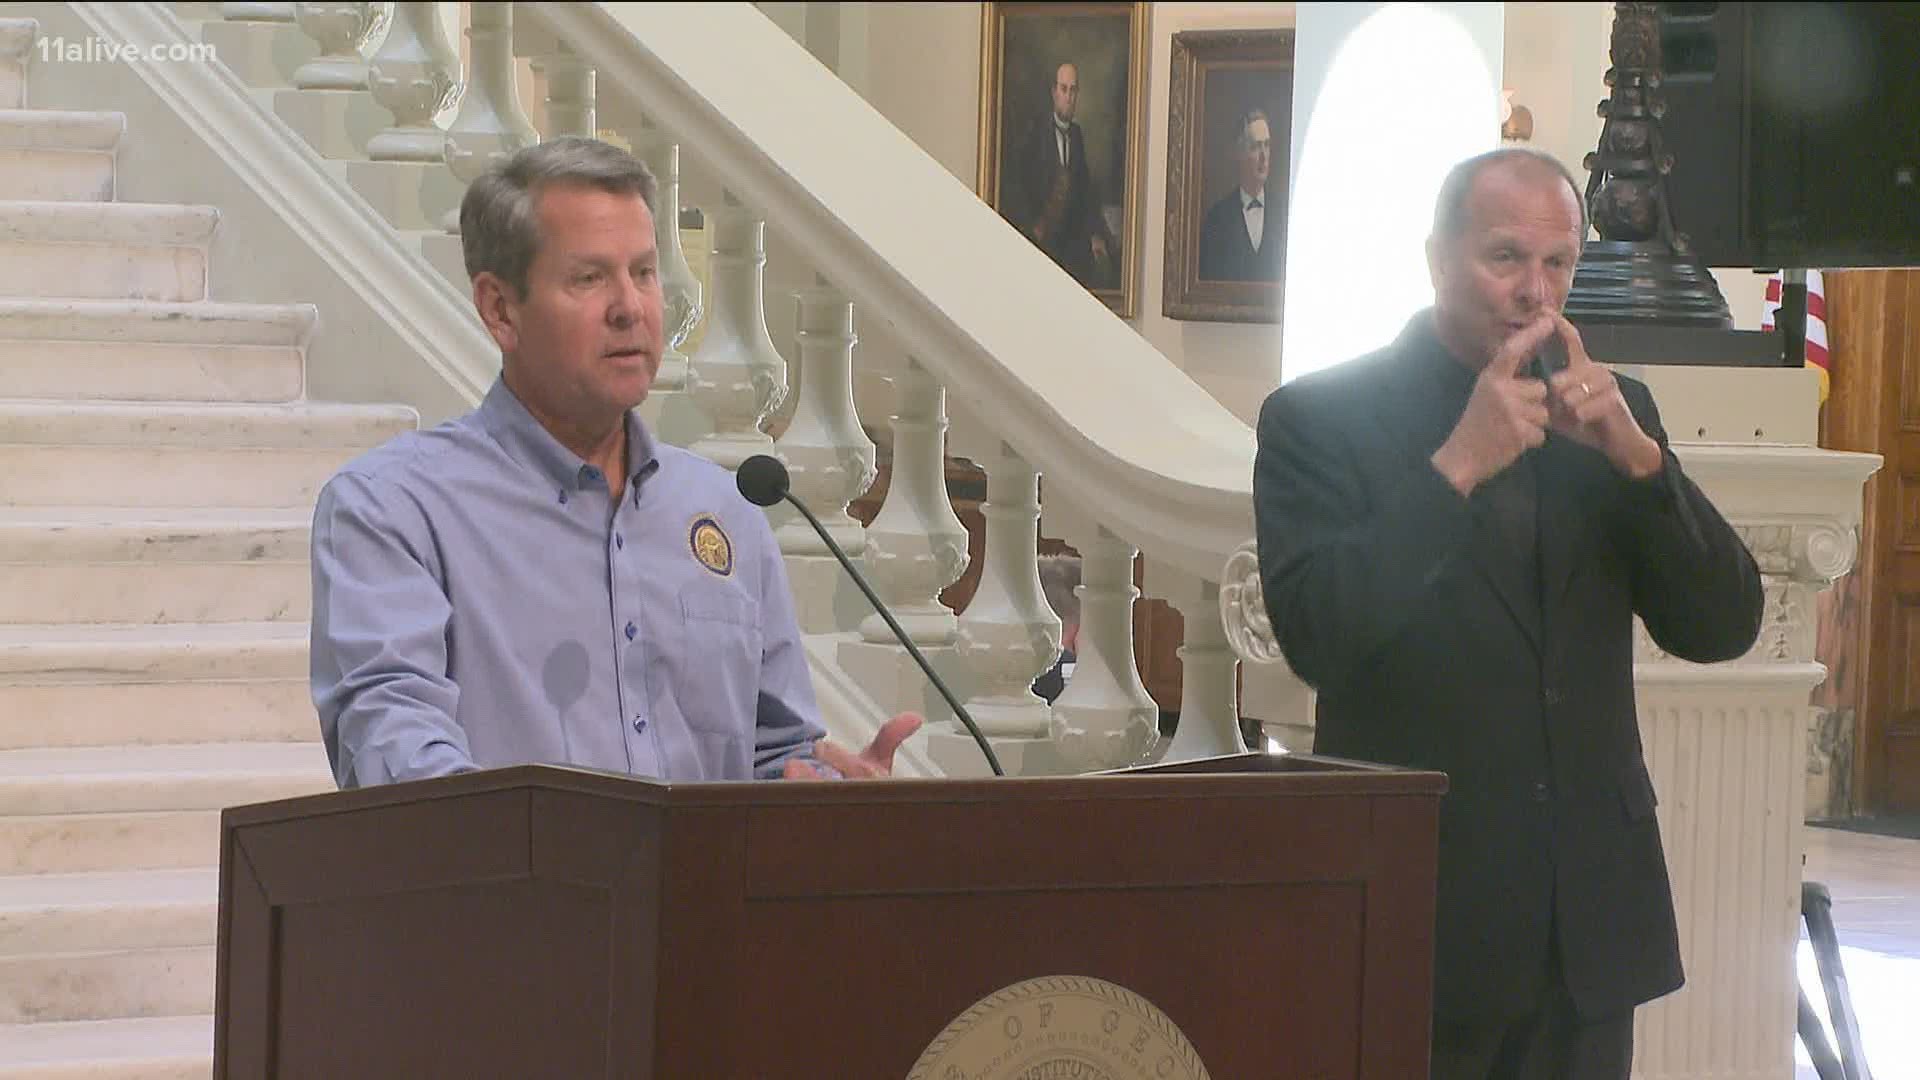 Governor Kemp, clearing up any confusion ON where he stands on the mask debate.